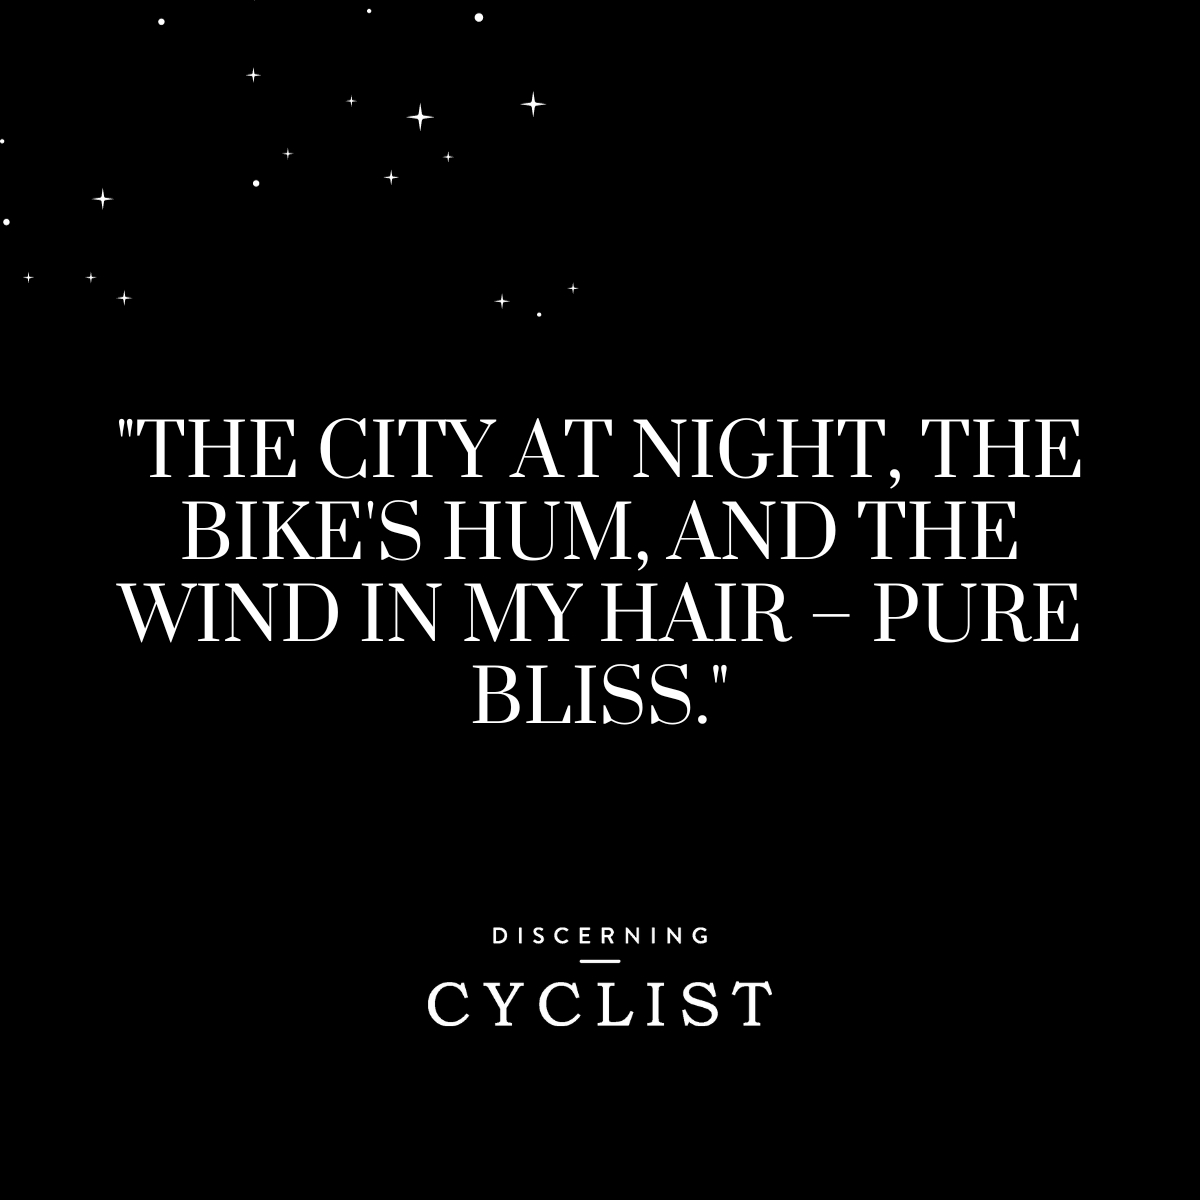 "The city at night, the bike